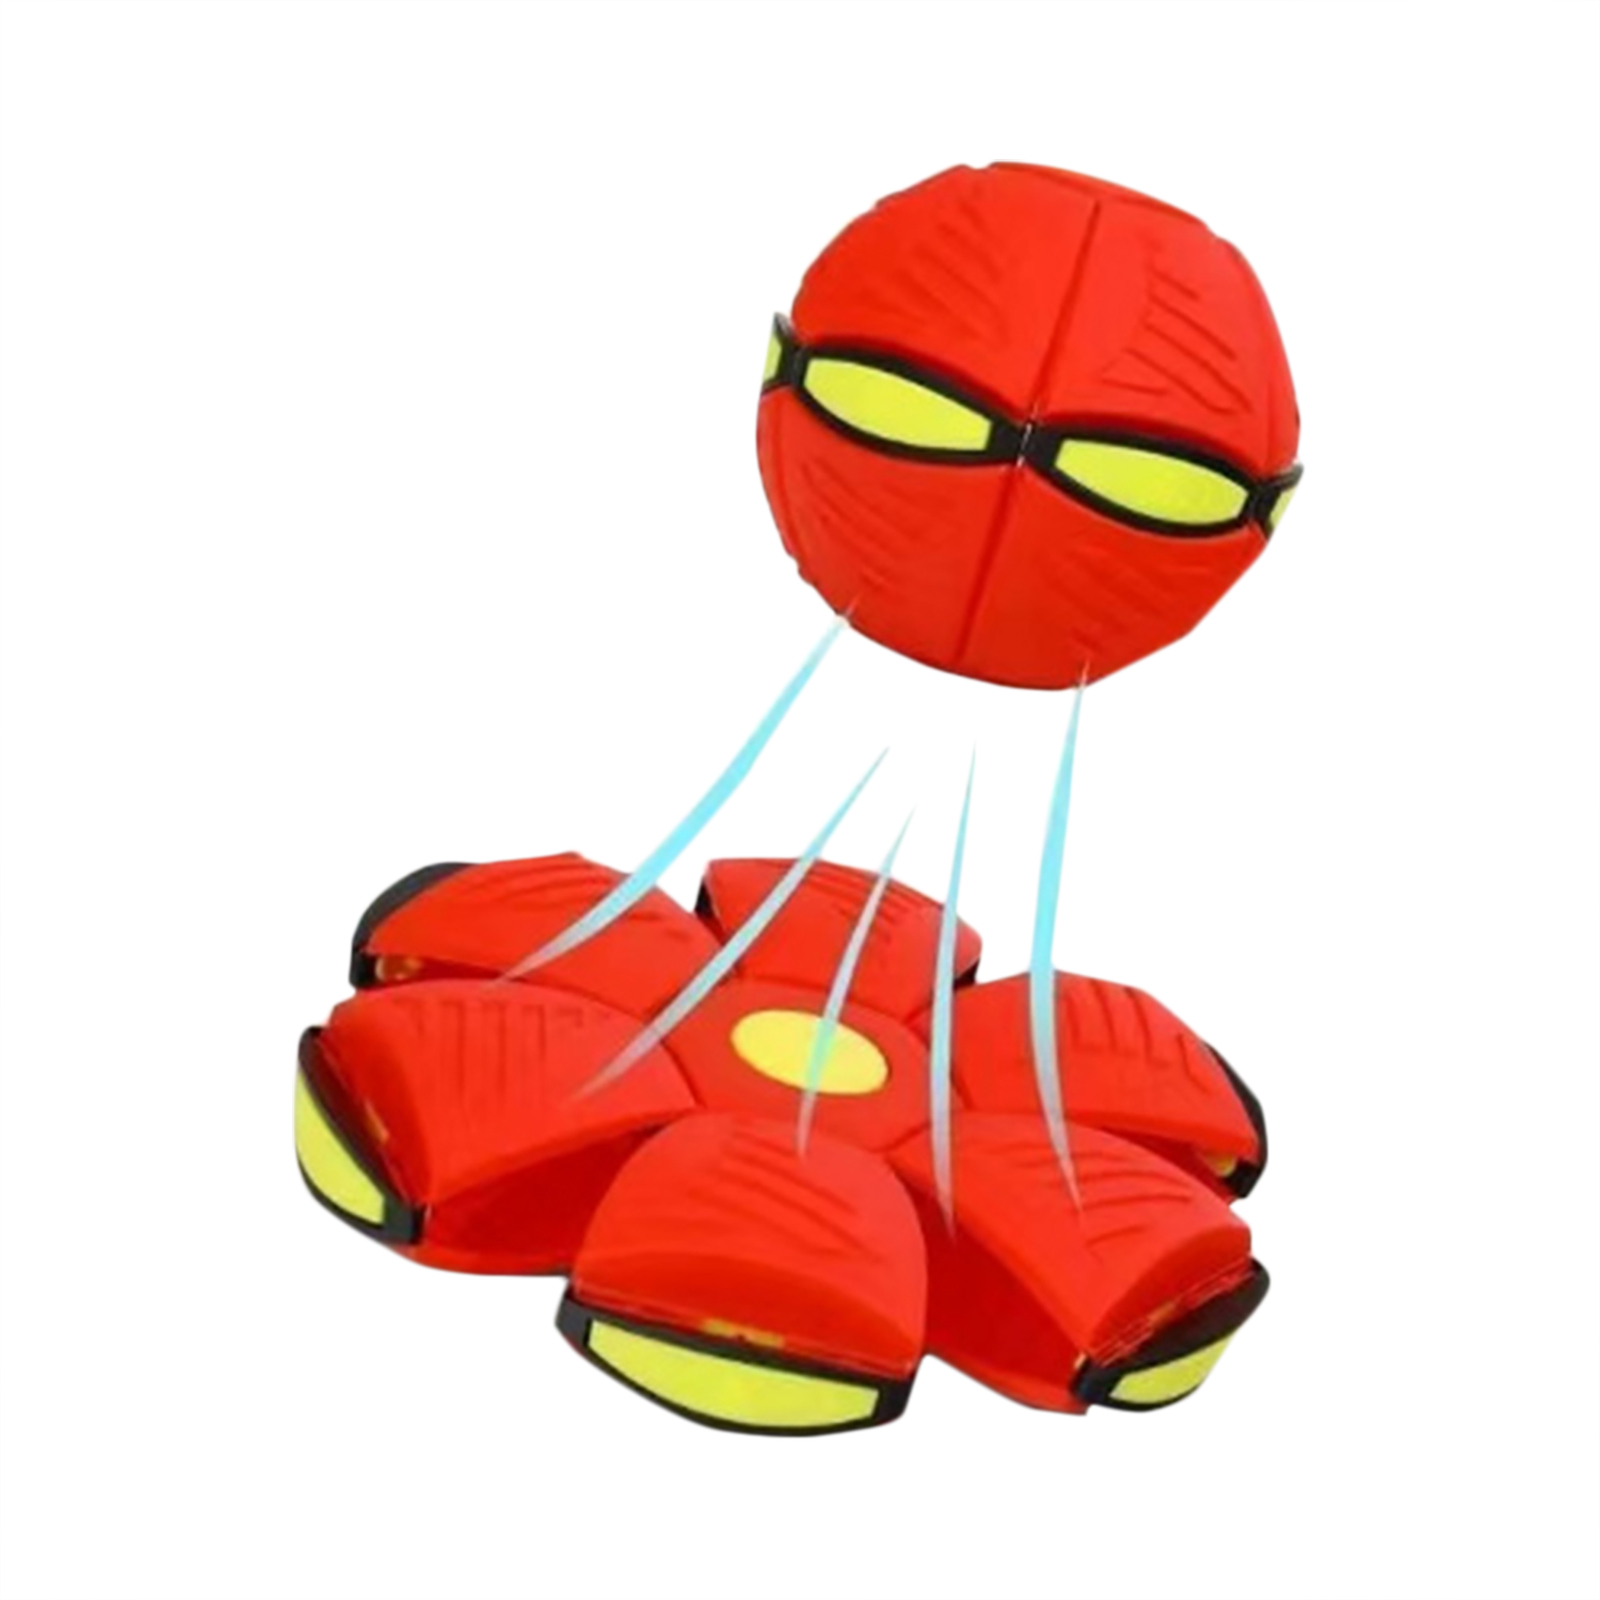 Flying Saucer Ball Magic Deformation UFO With Led Light Flying Toys Decompression Children Outdoor Fun Toys For Kids Gift